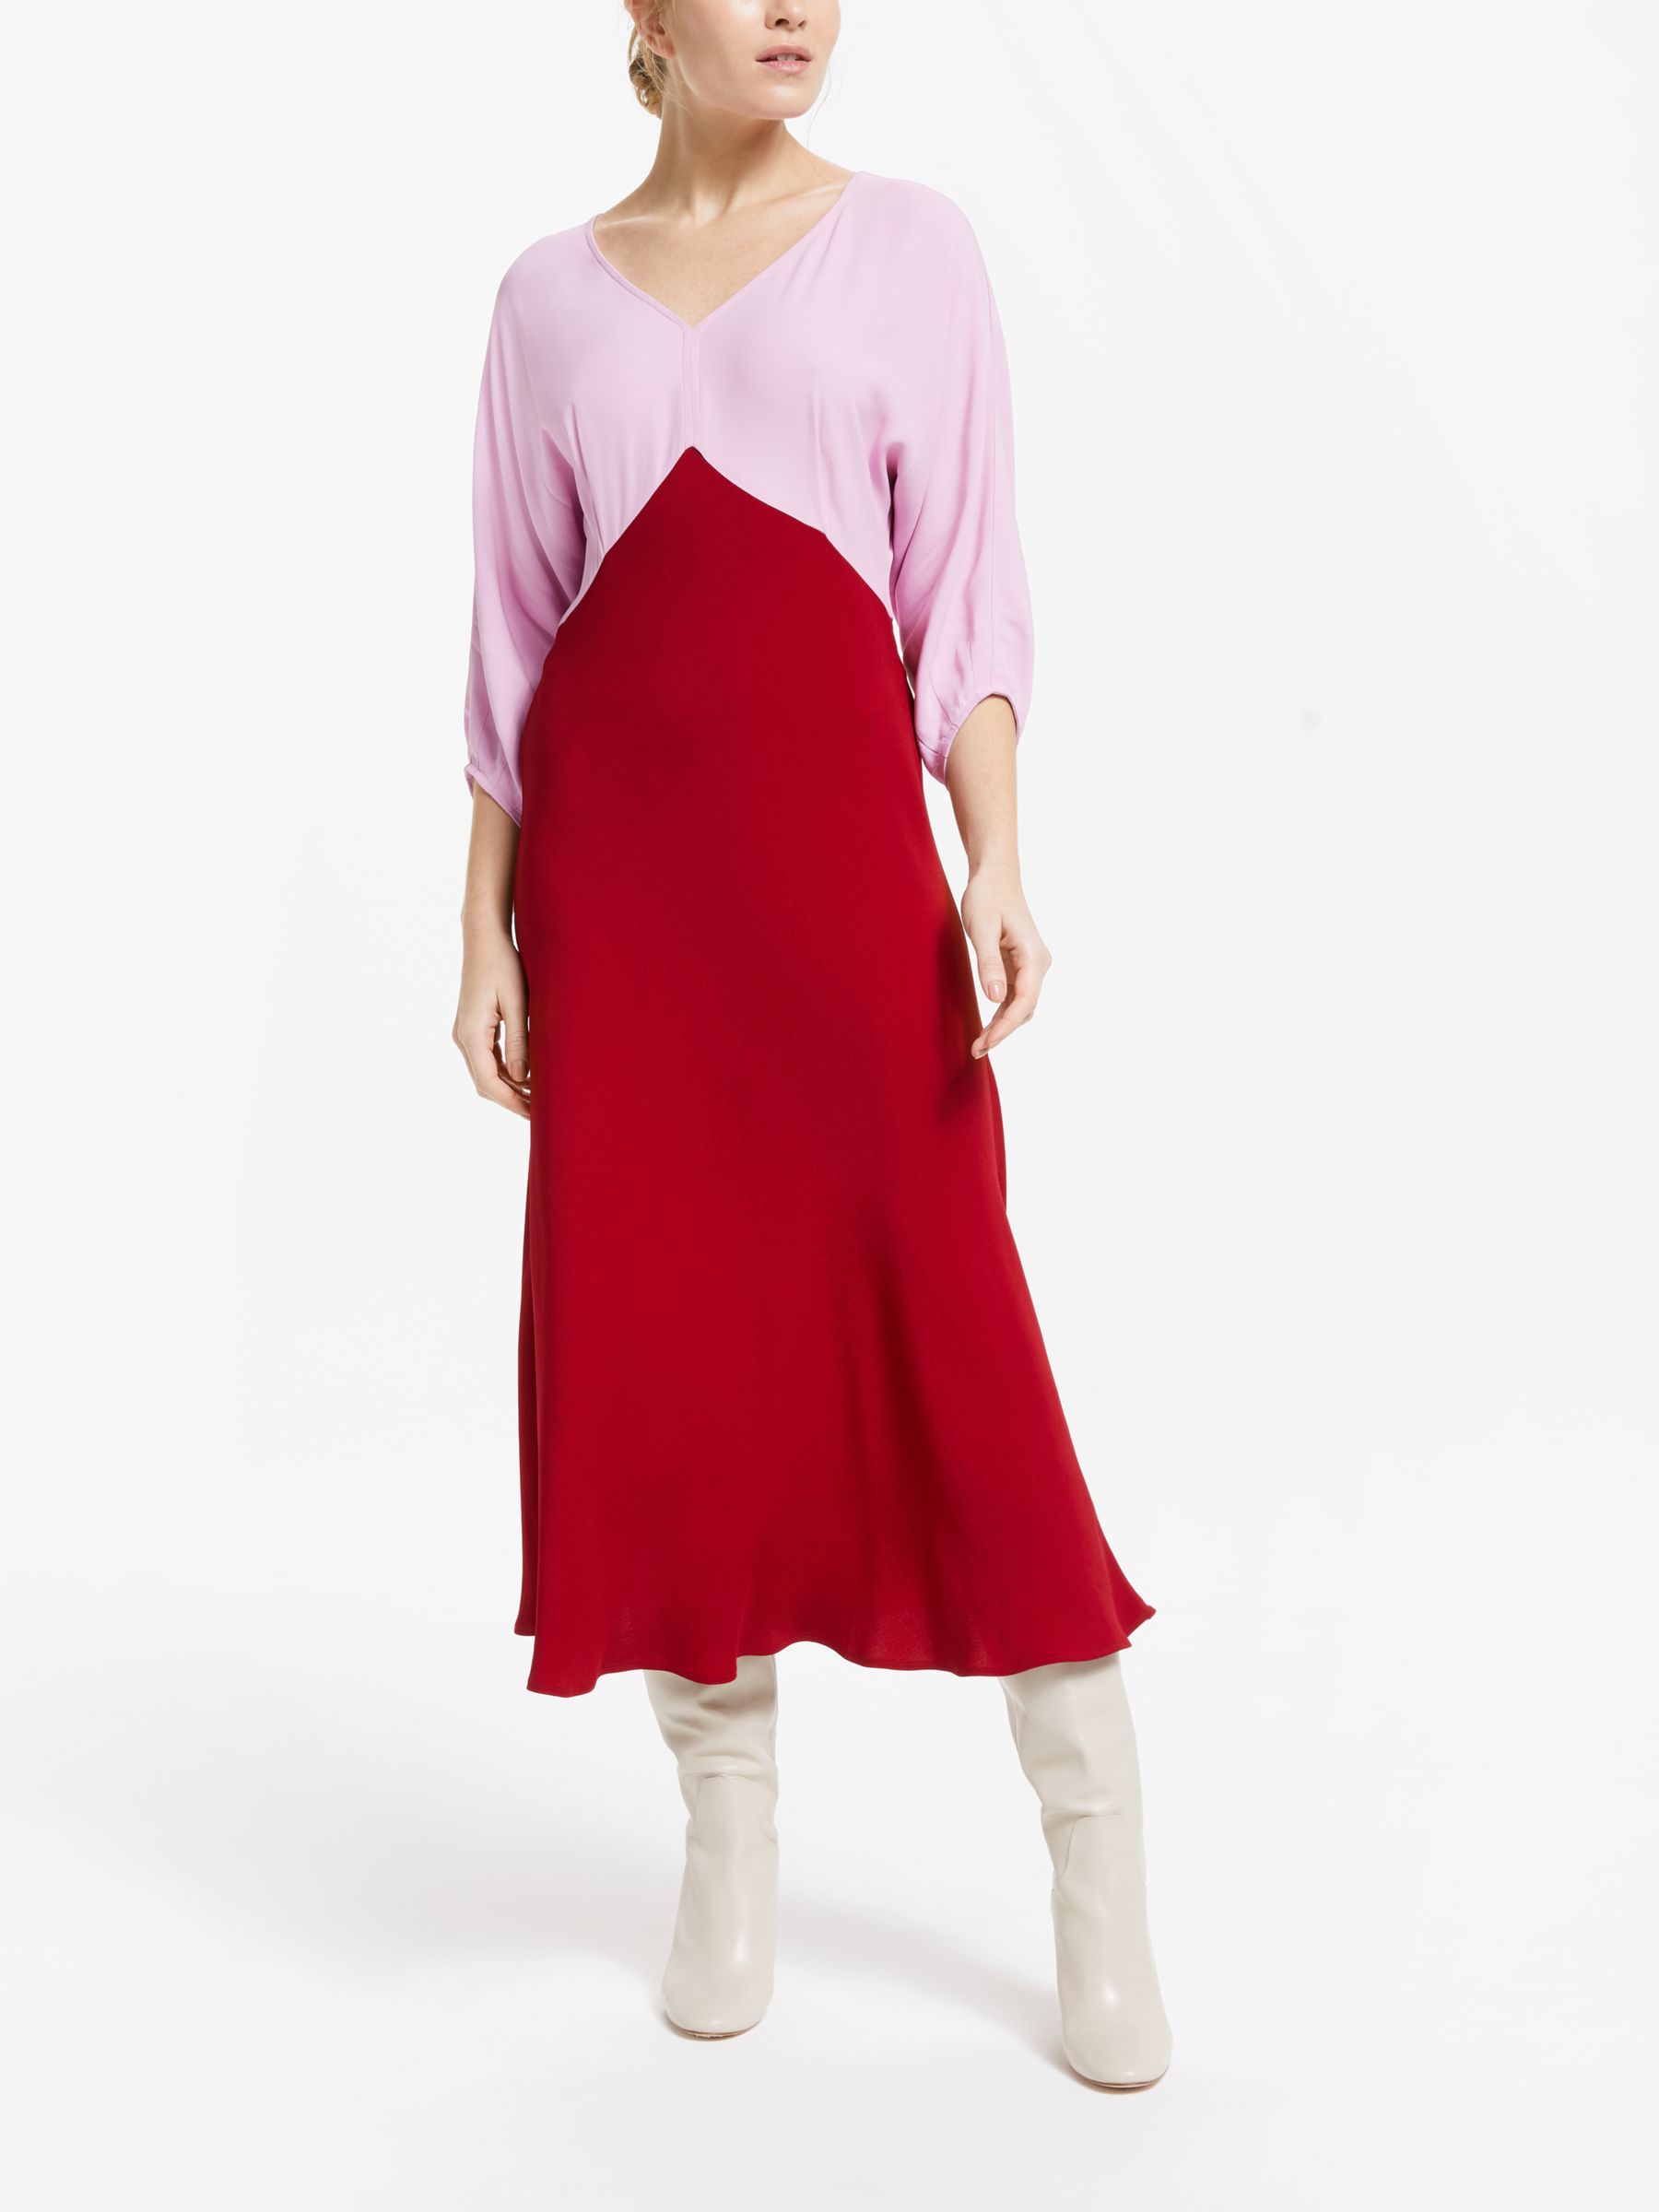 red and pink colour block dress